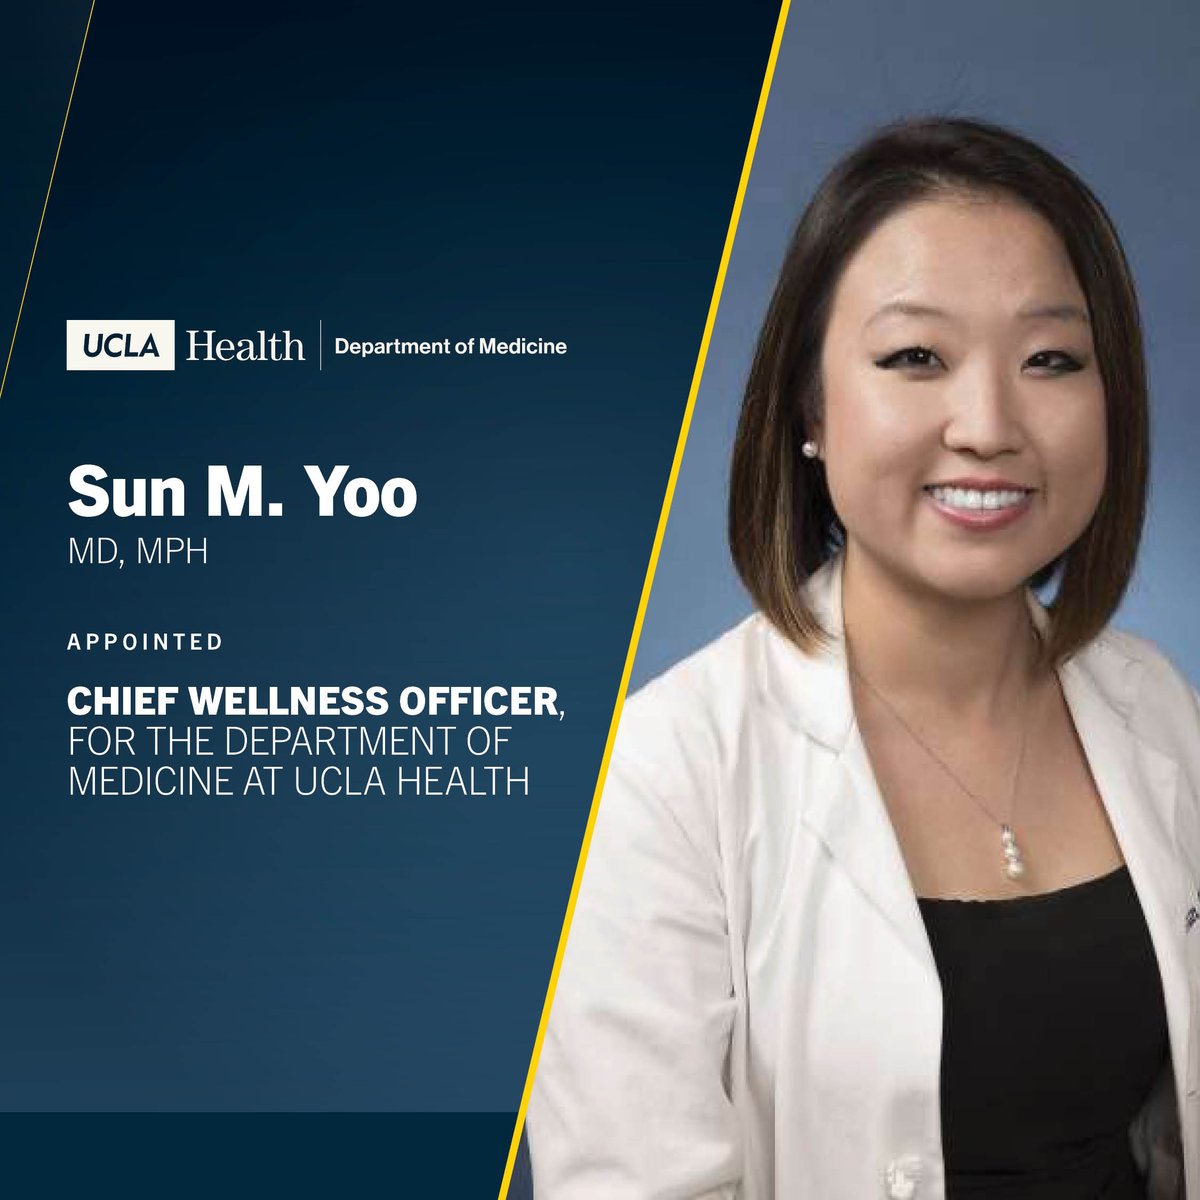 We are pleased to announce that Sun M. Yoo, MD, MPH has been appointed chief wellness officer for the Department of Medicine at UCLA Health. Join us in congratulating Dr. Yoo as she assumes this new leadership role! Learn more at bit.ly/3uGaI6G.